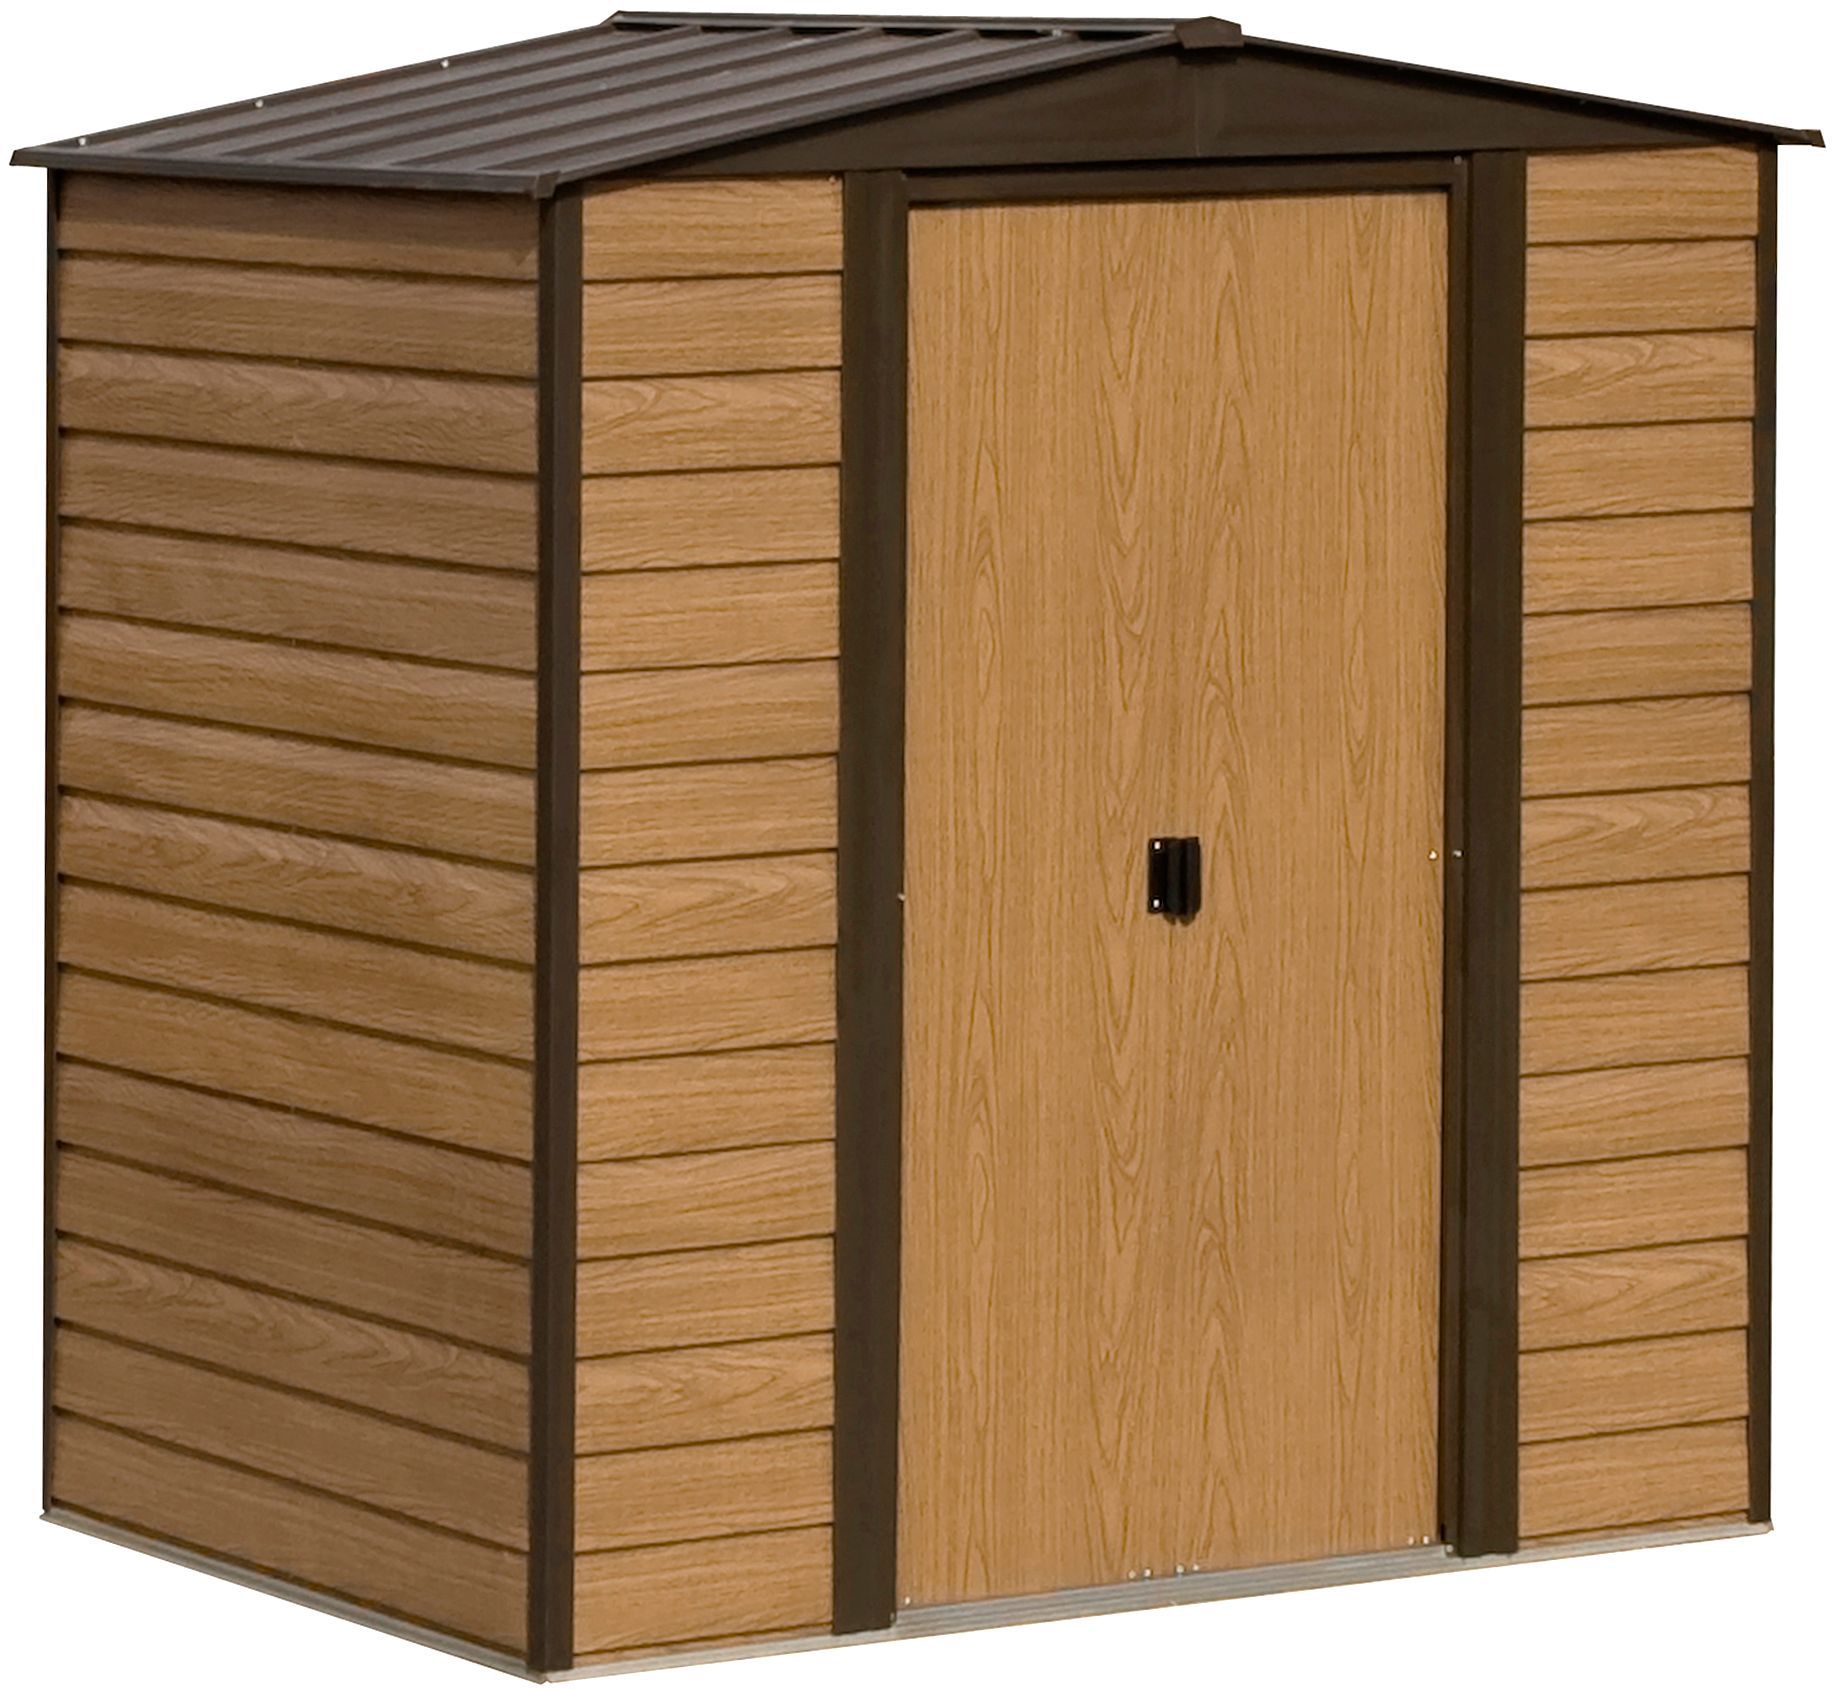 Rowlinson 6x5 Woodvale Metal Apex Shed With Floor Garden Storage